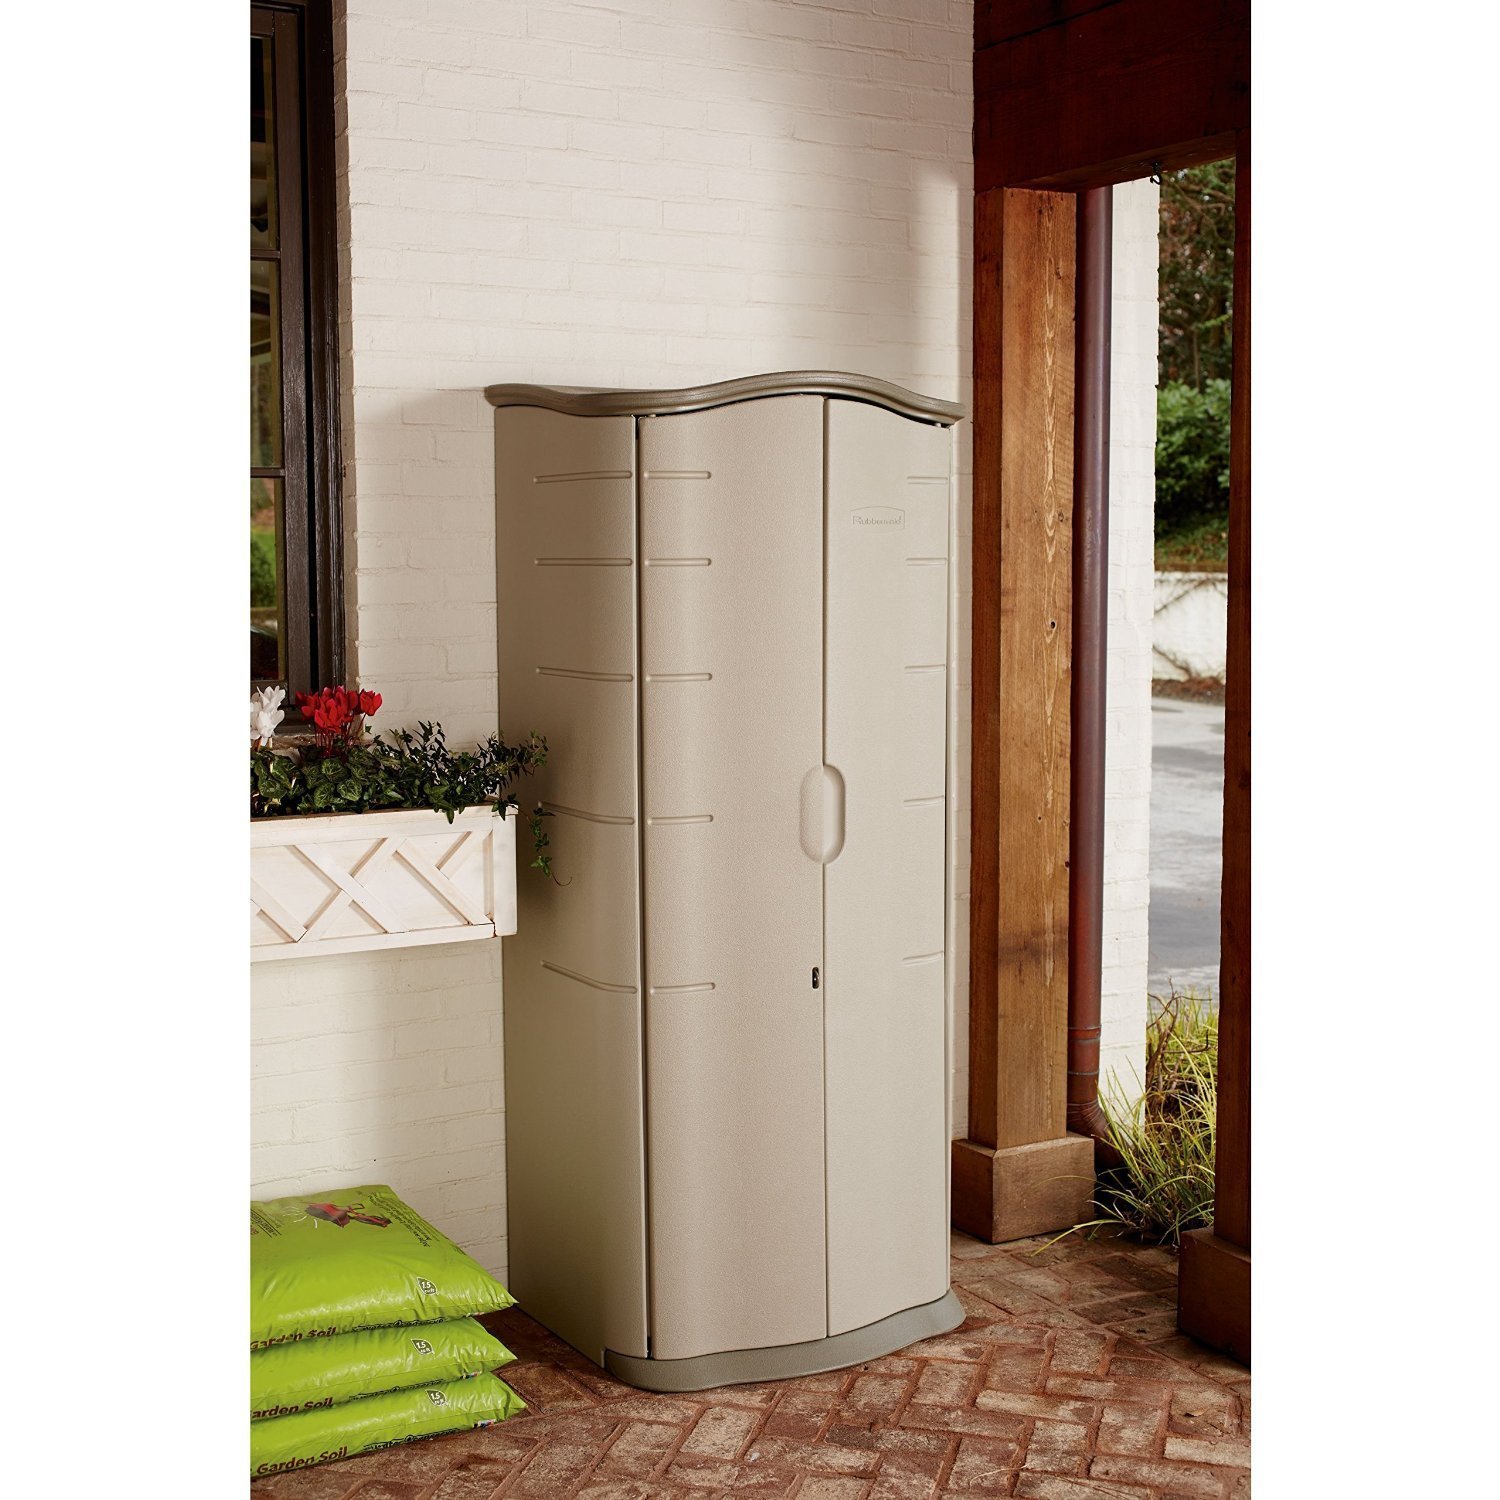 Rubbermaid 121-Gallon Vertical Storage Shed. Reviews and 